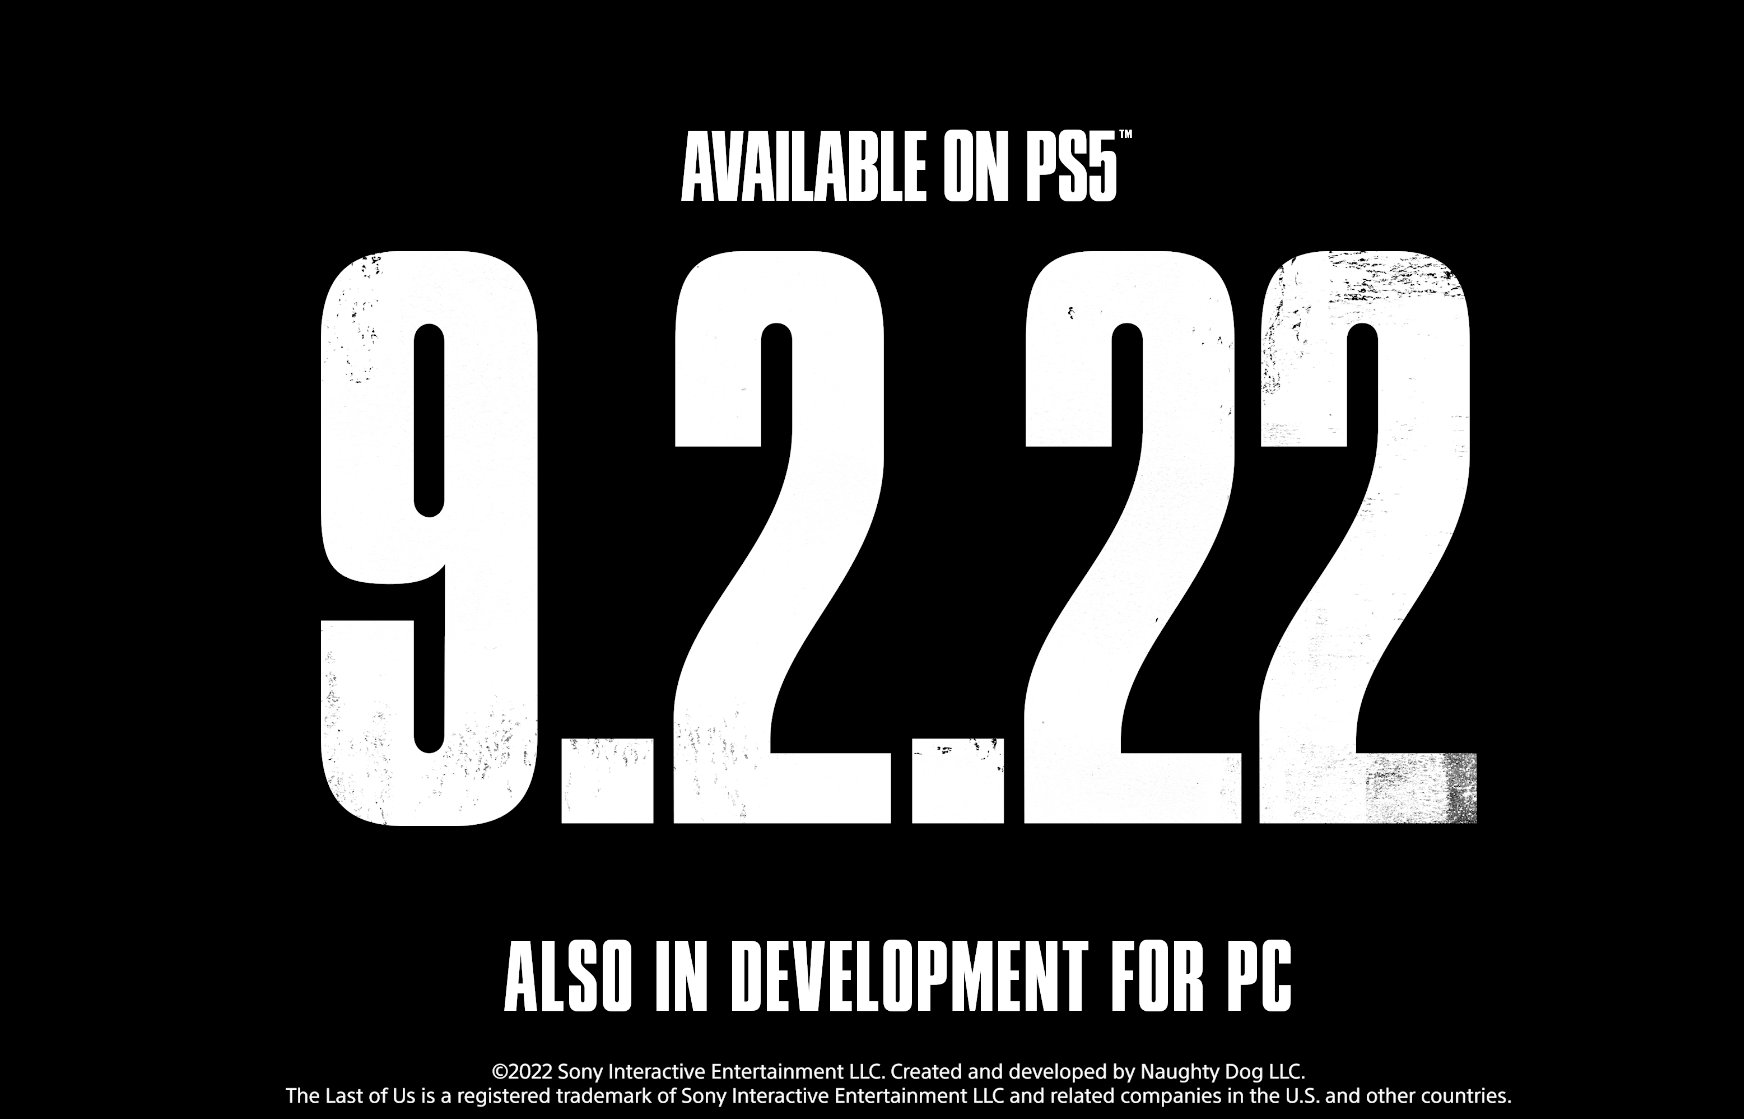 Report: The Last of Us PS5, PC Launching in September 2022 - PlayStation  LifeStyle